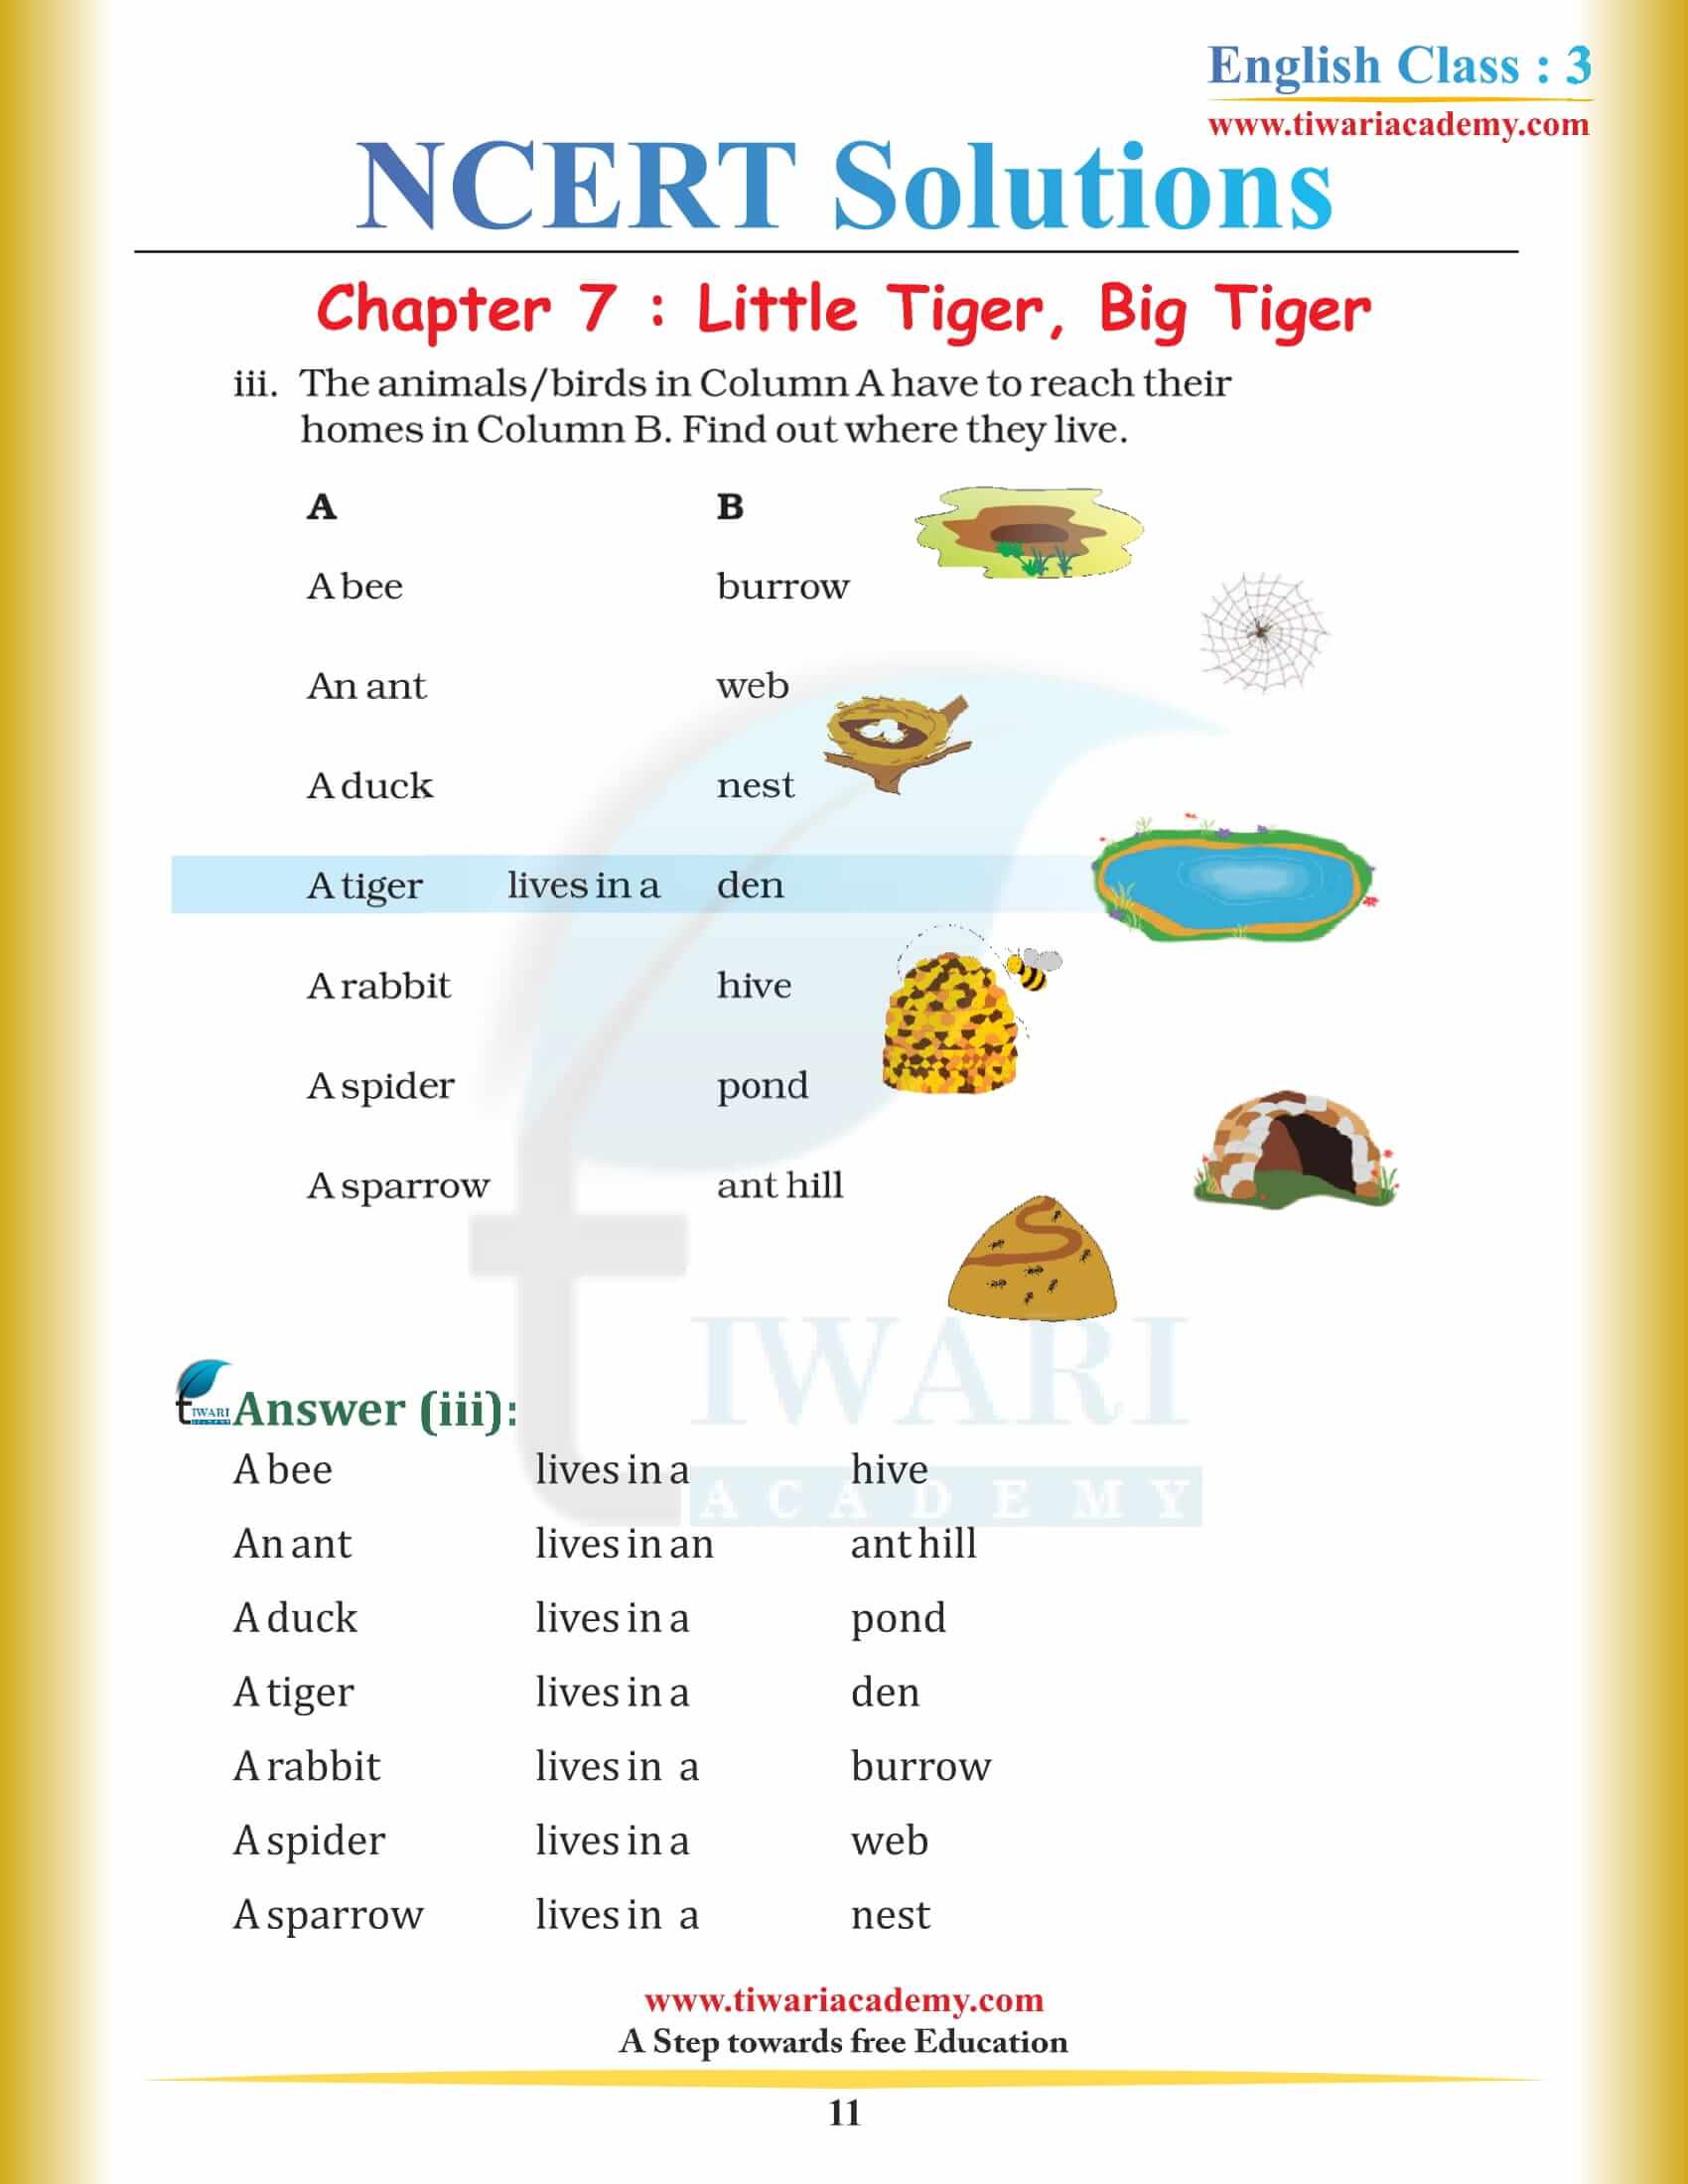 Class 3 NCERT English Book Unit 7 answers in pdf